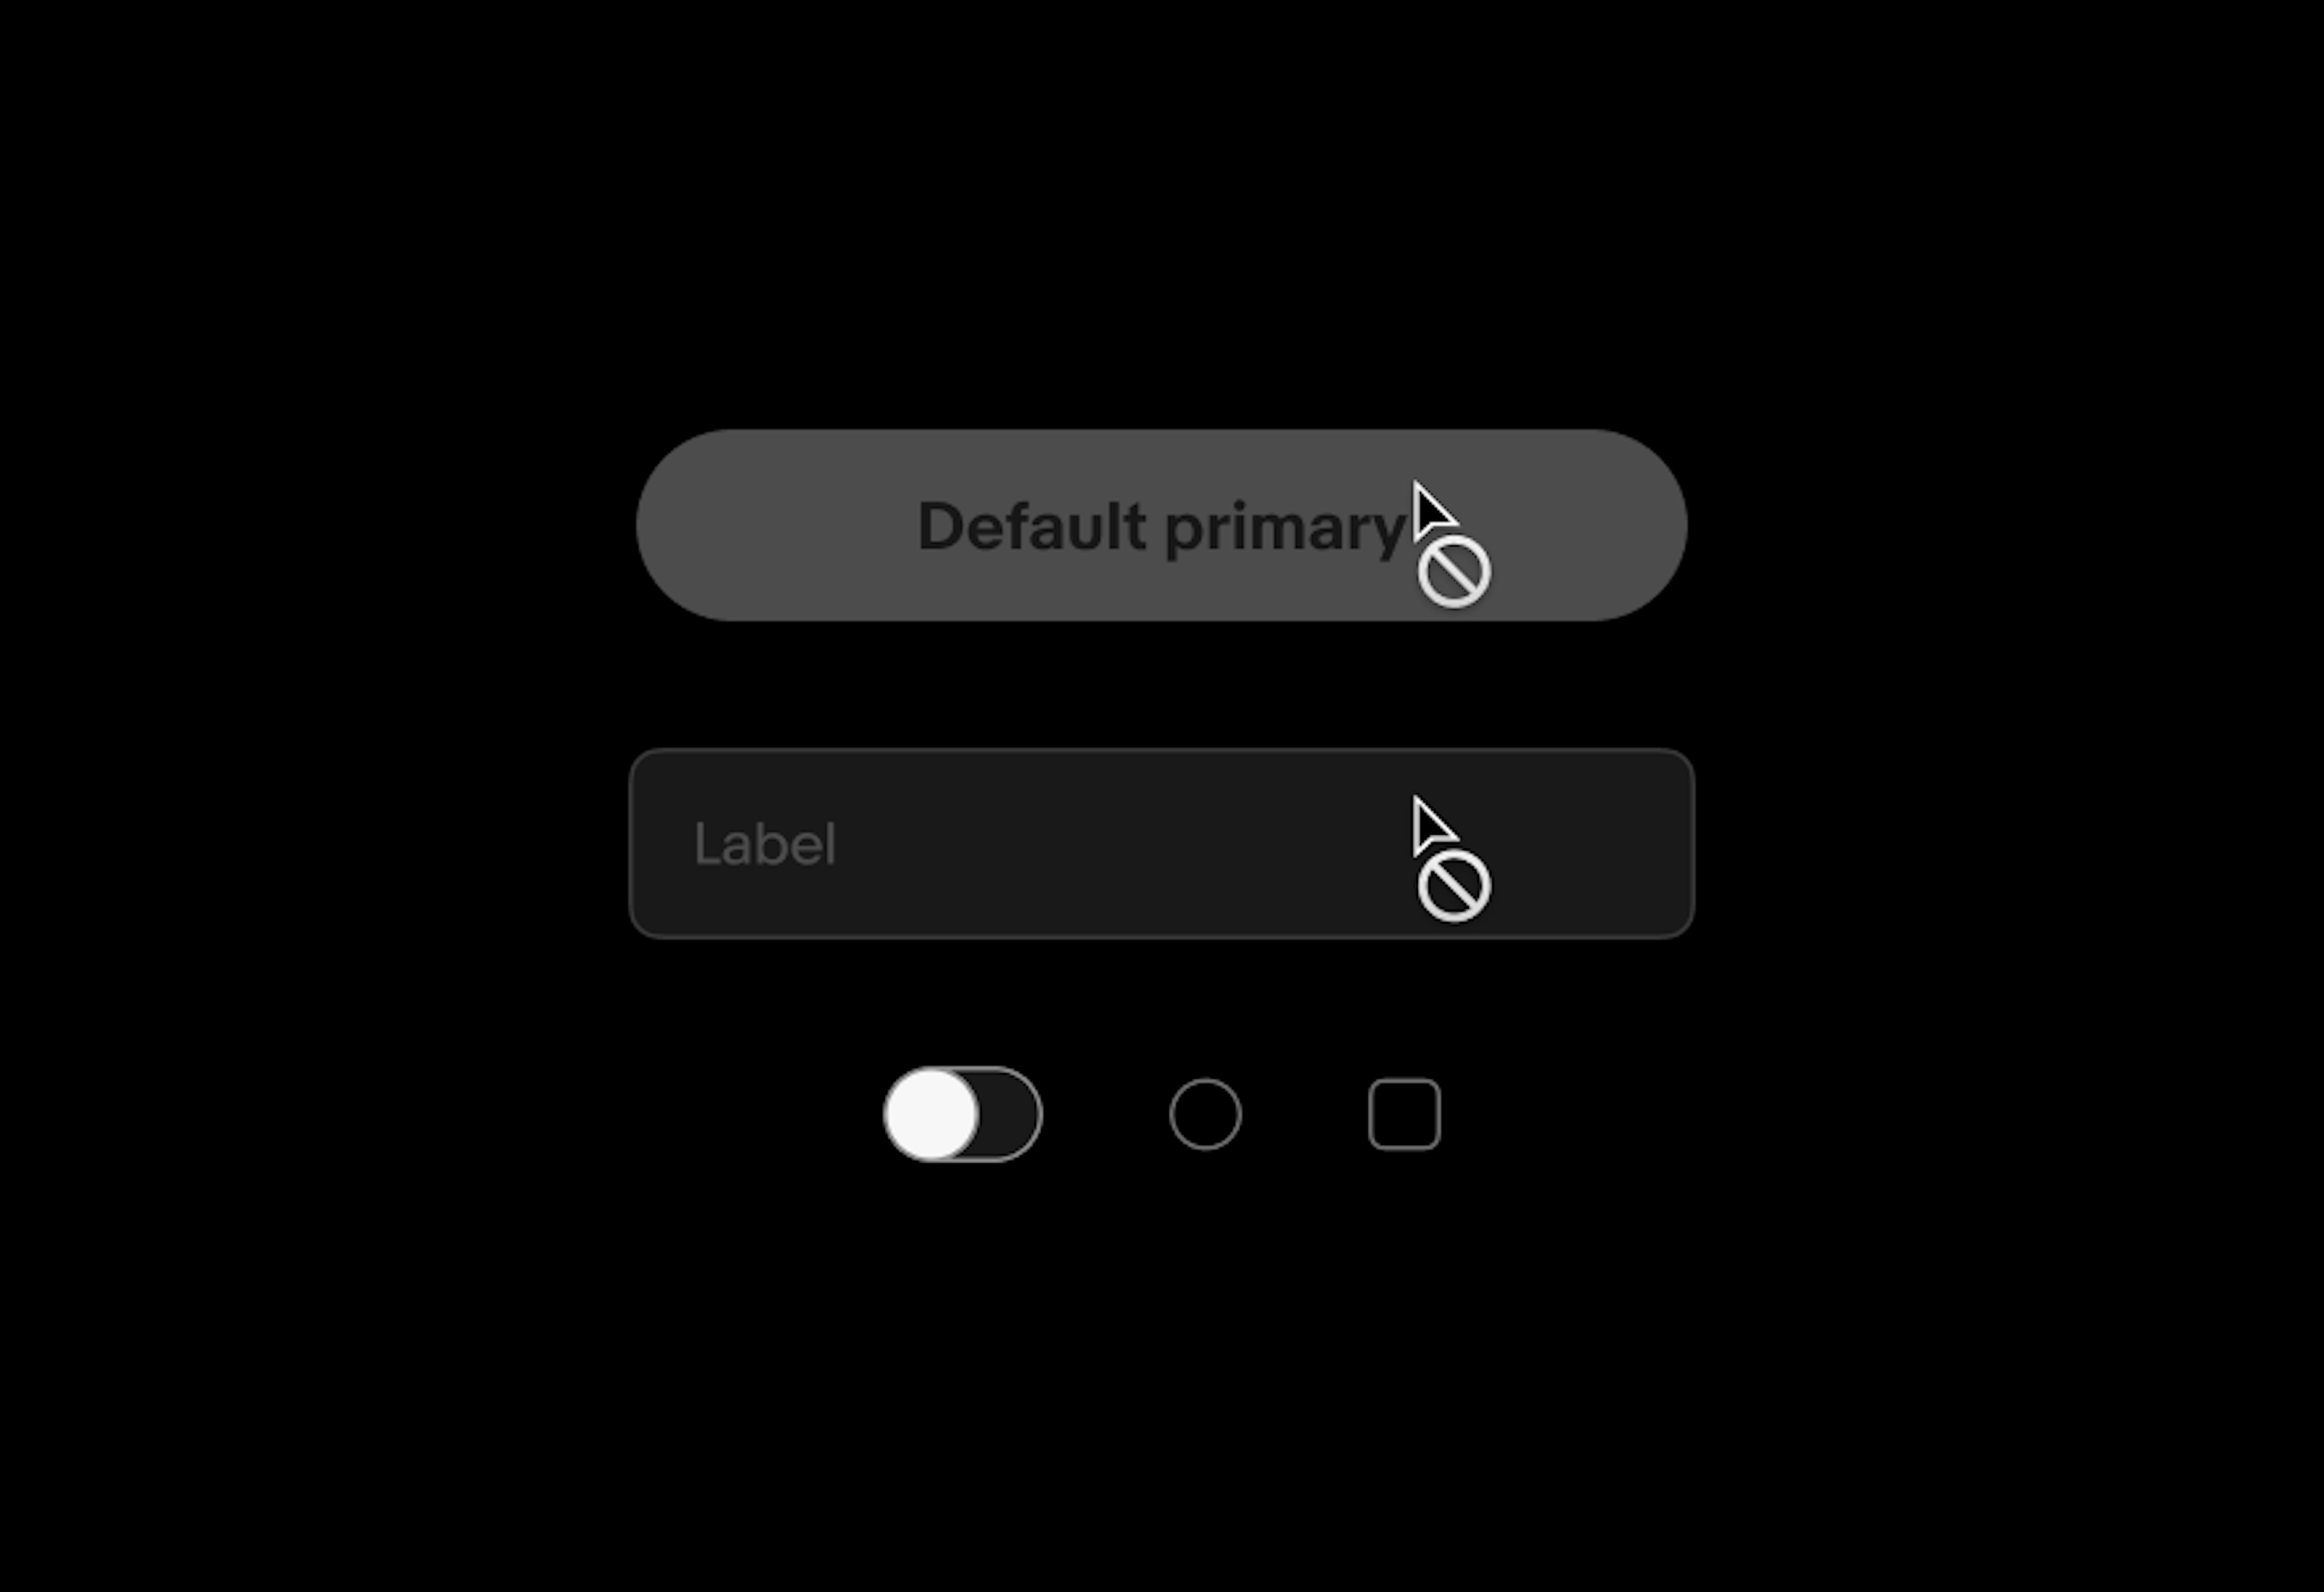 Disabled elements in dark mode. From top to bottom is cta button, text field, toggle, radio button, and checkbox. All are grayed out. On hover an icon appears next to the cursor containing a circle with a diagonal line.